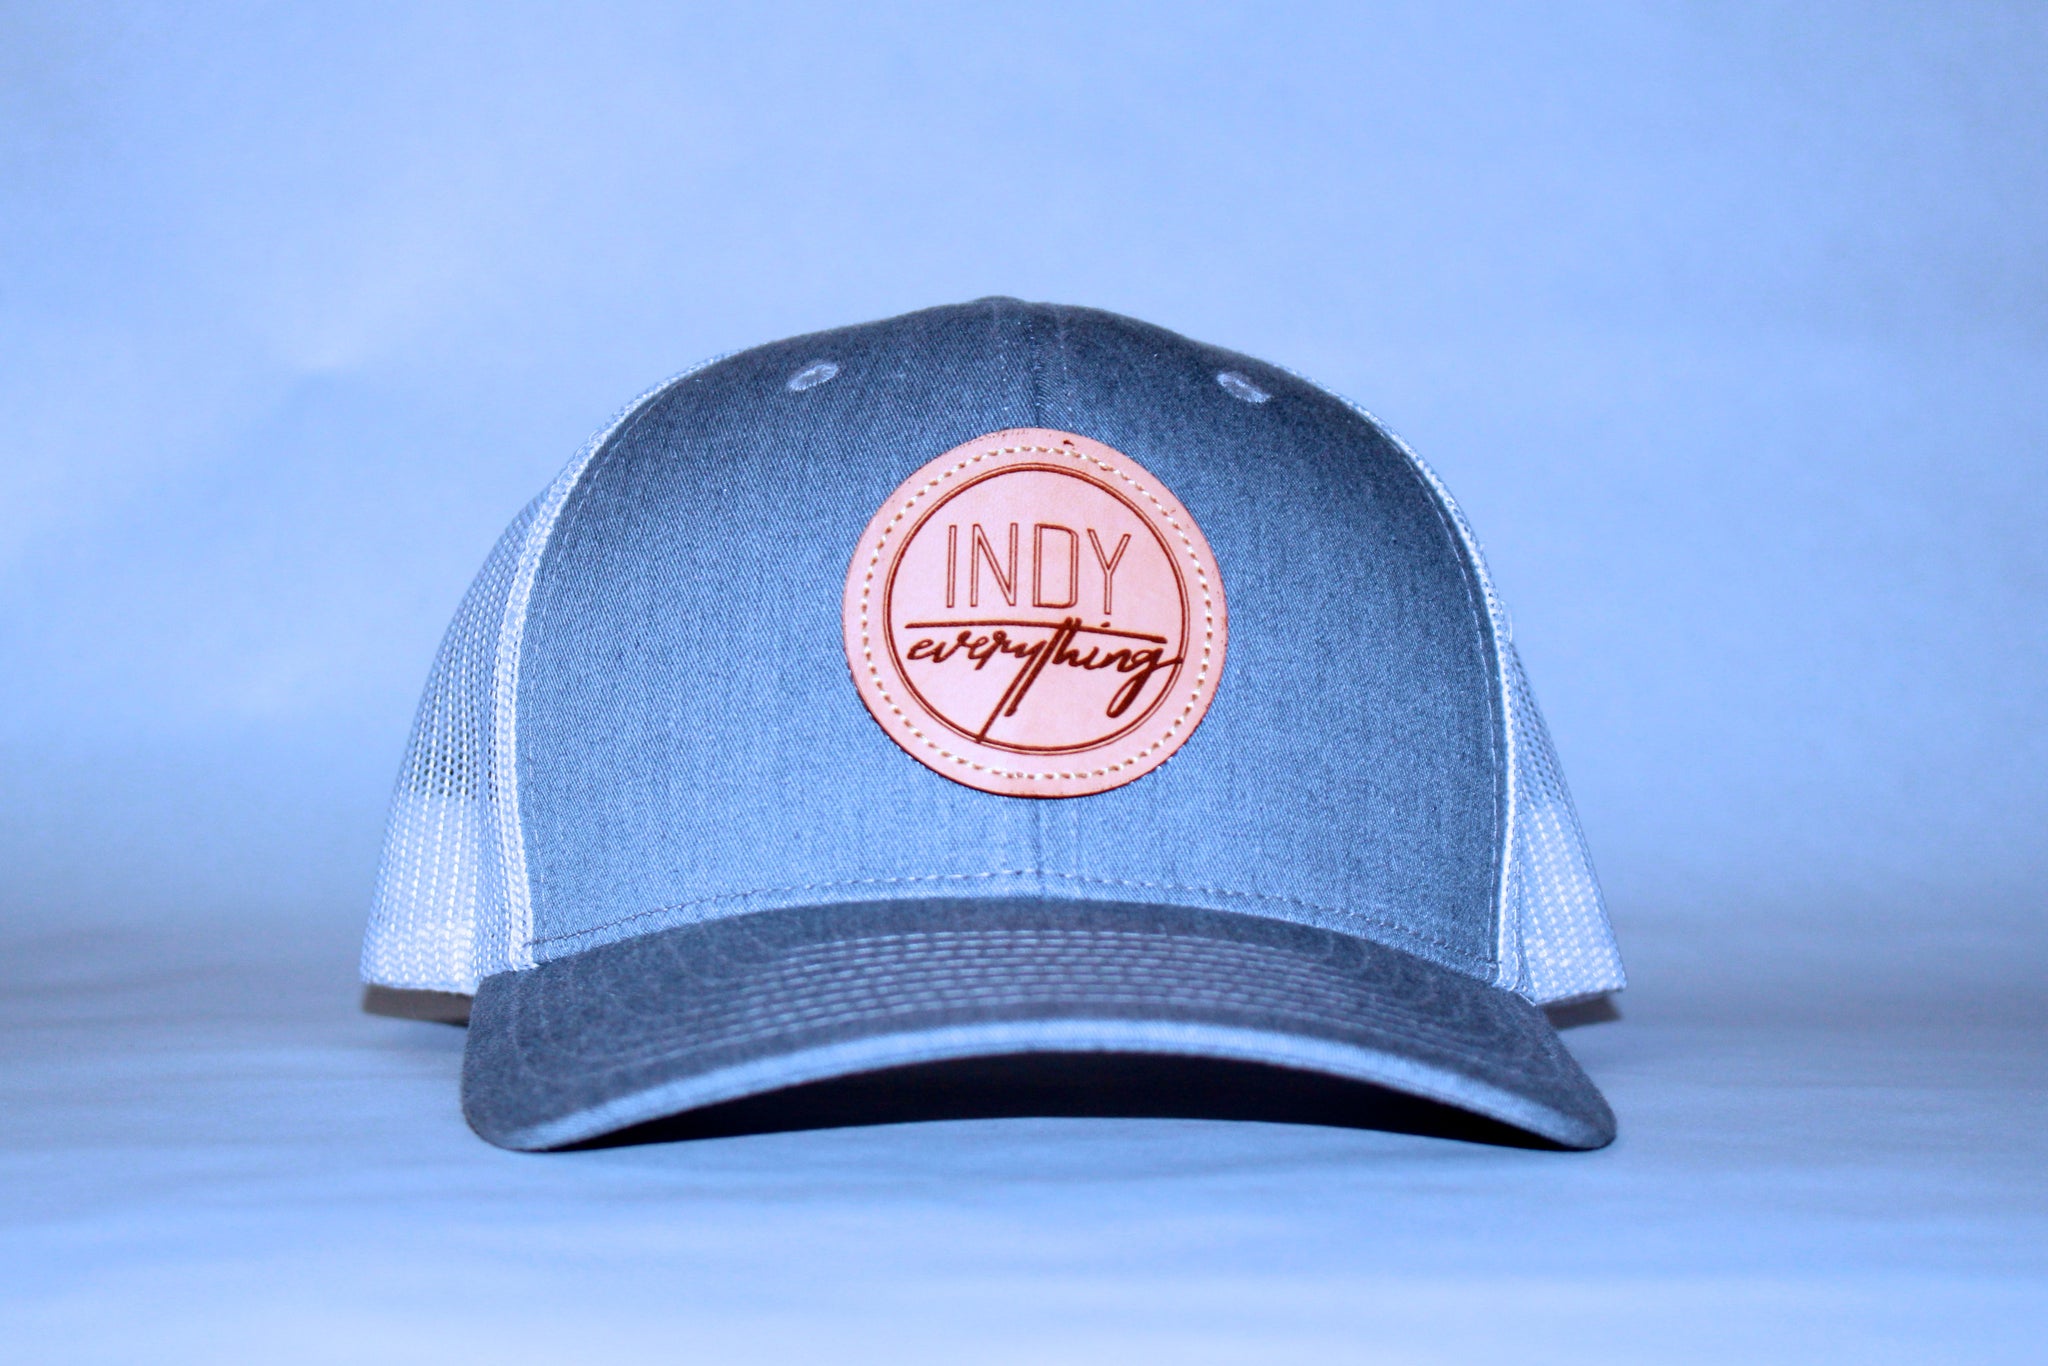 TRUCKER HAT - GRAY AND WHITE W/ LEATHER BADGE - Indy Over Everything